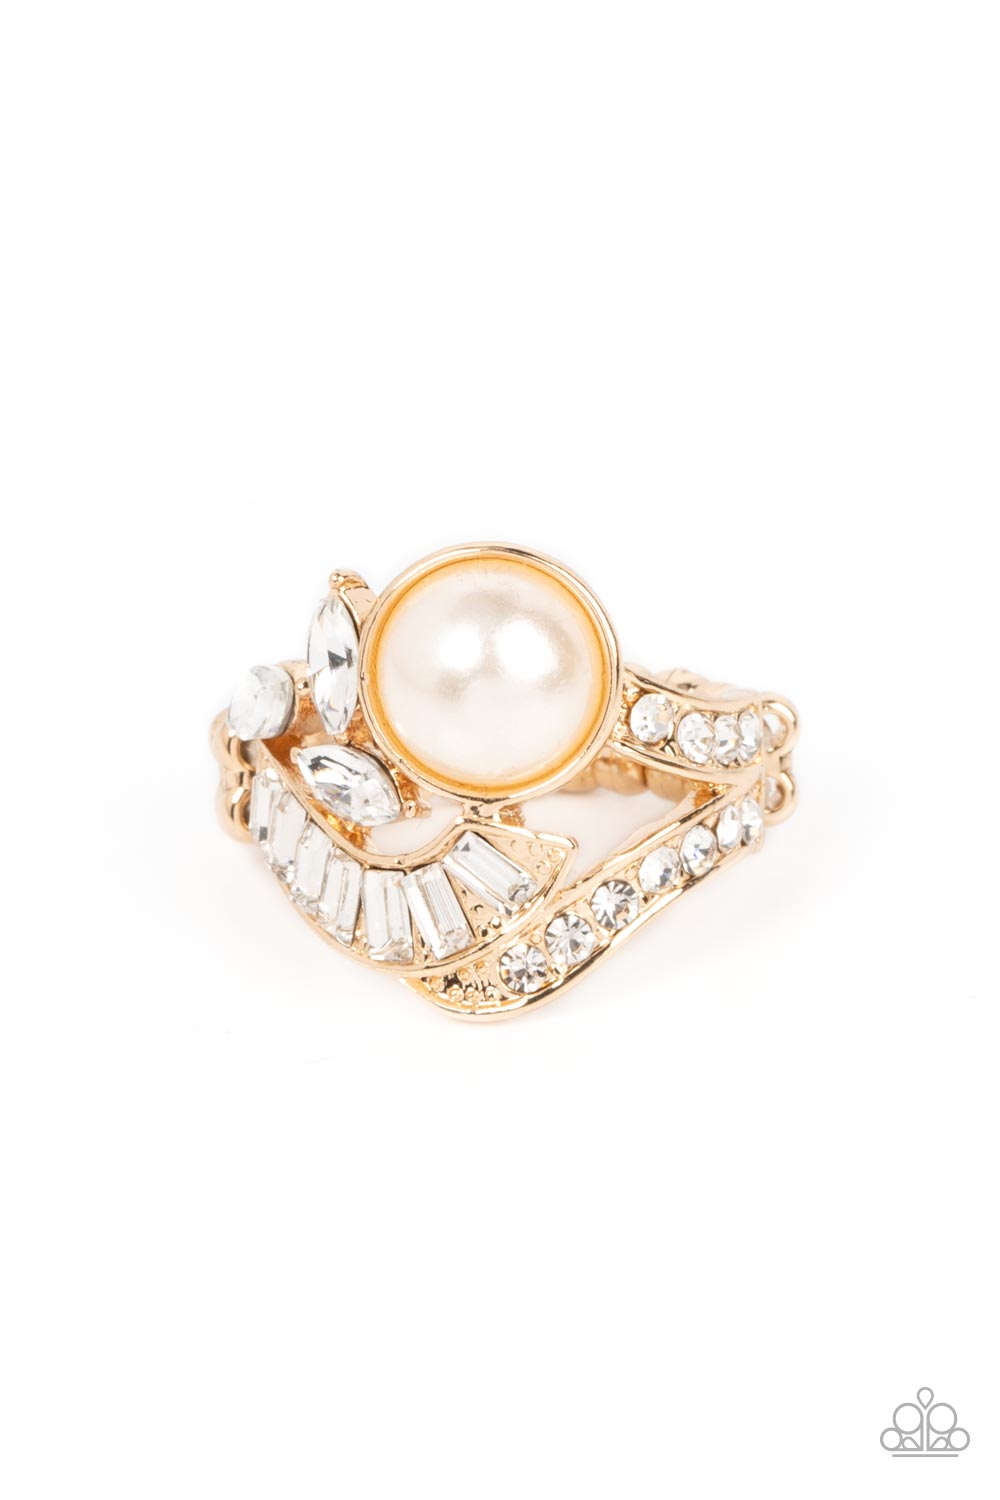 Paparazzi Accessories - Selfie Made Millionaire - Gold Rings gold ribbons adorned in round and emerald cut rhinestones delicately nestle around an oversized white pearl. Enhanced with a trio of white marquise cut rhinestones, the lavishly layered centerpiece sparkles atop the finger for an elegant fashion. Features a stretchy band for a flexible fit.  Sold as one individual ring.